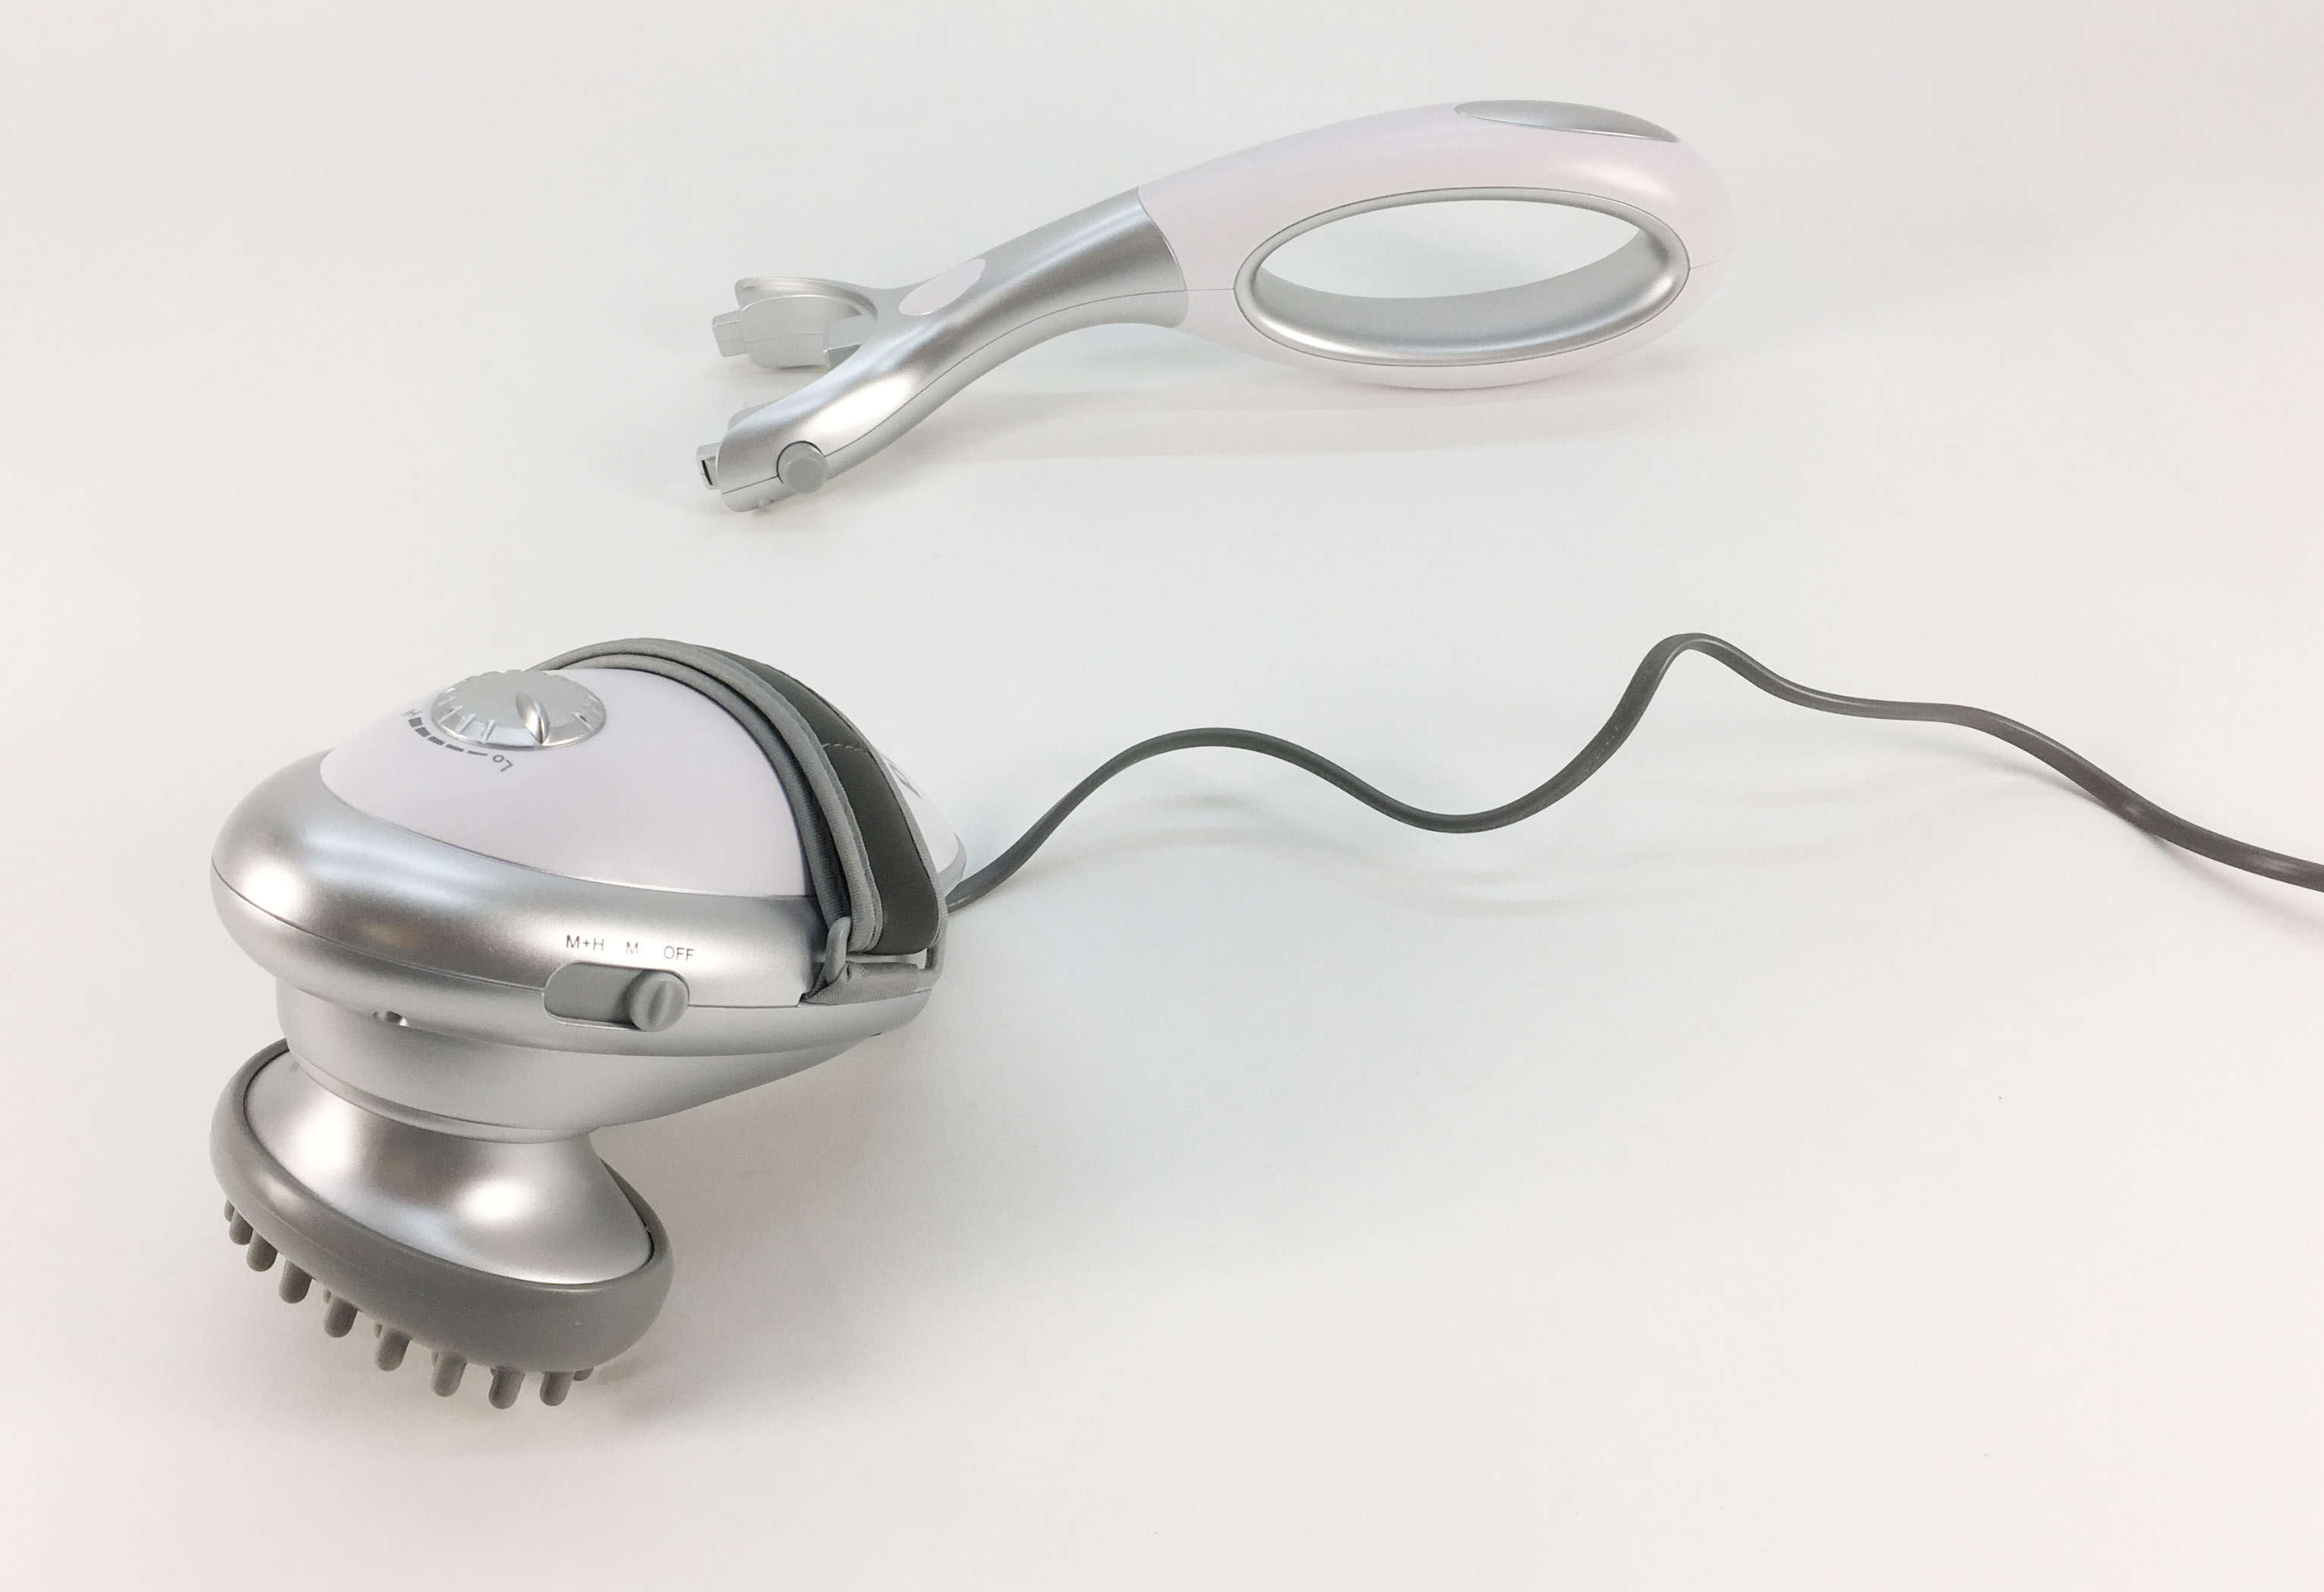 The handle of the Prorelax intensive massage device can be removed for easier handling